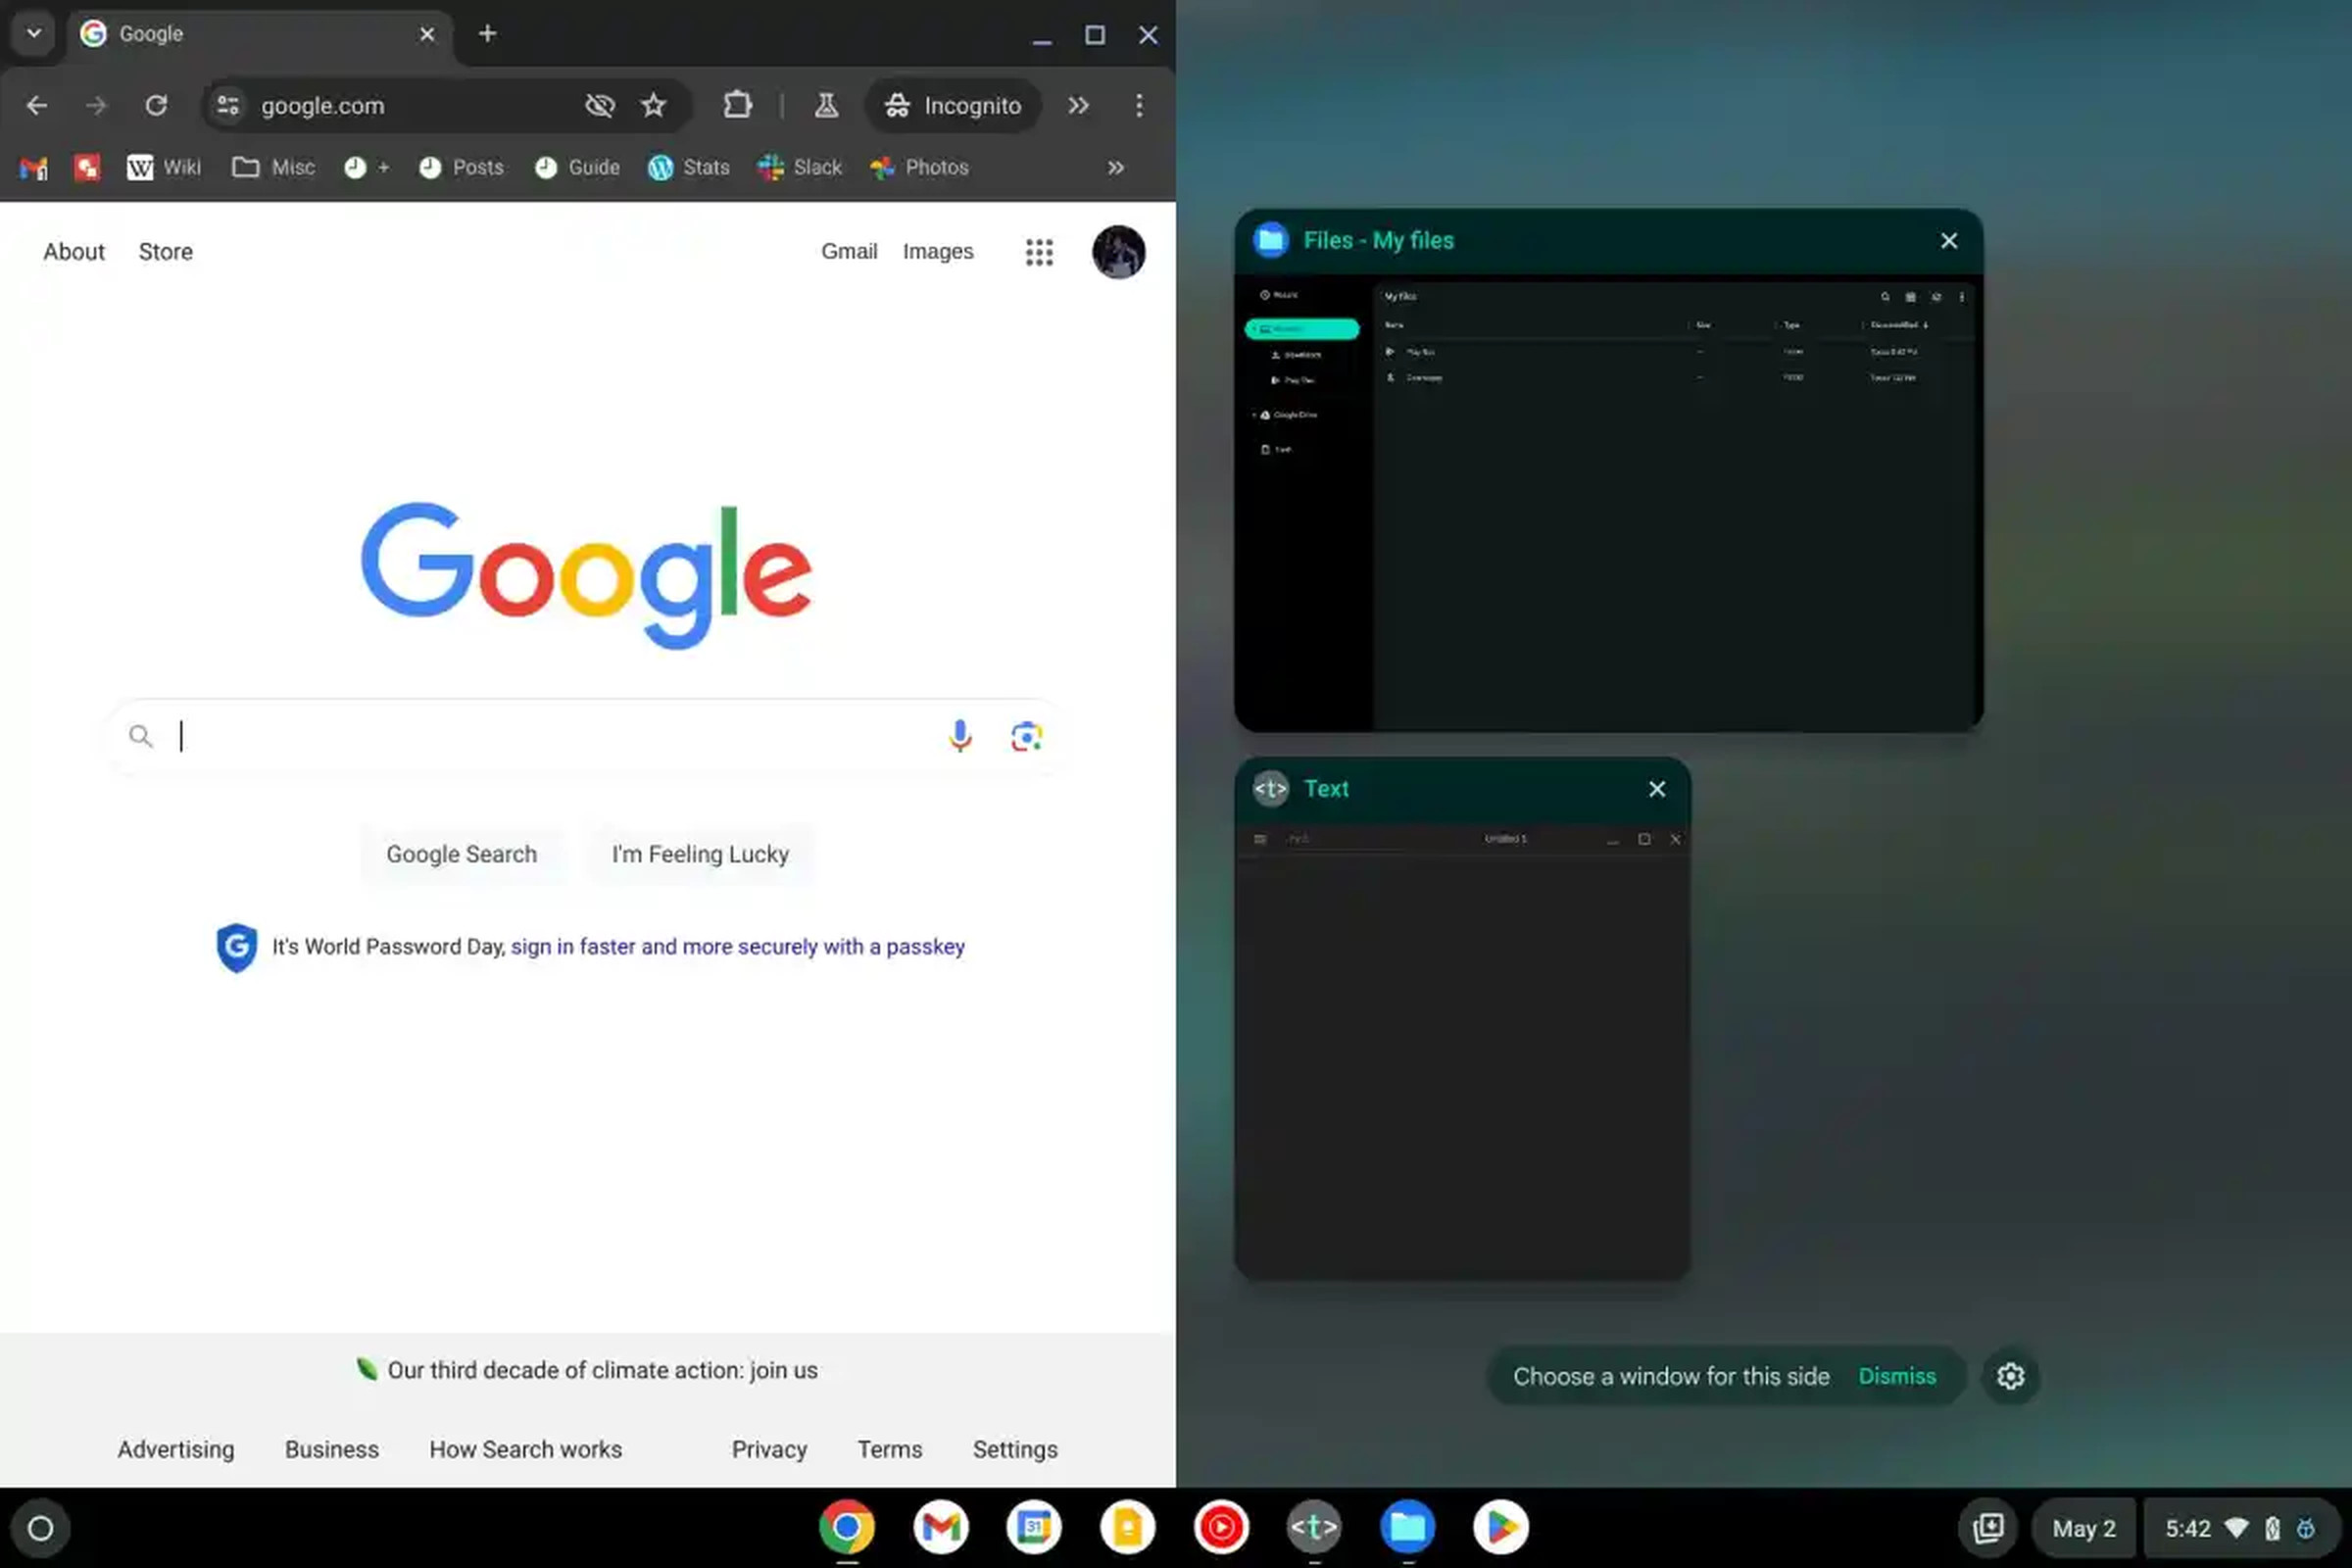 A screenshot showing the split screen setup in the latest Chrome OS version.